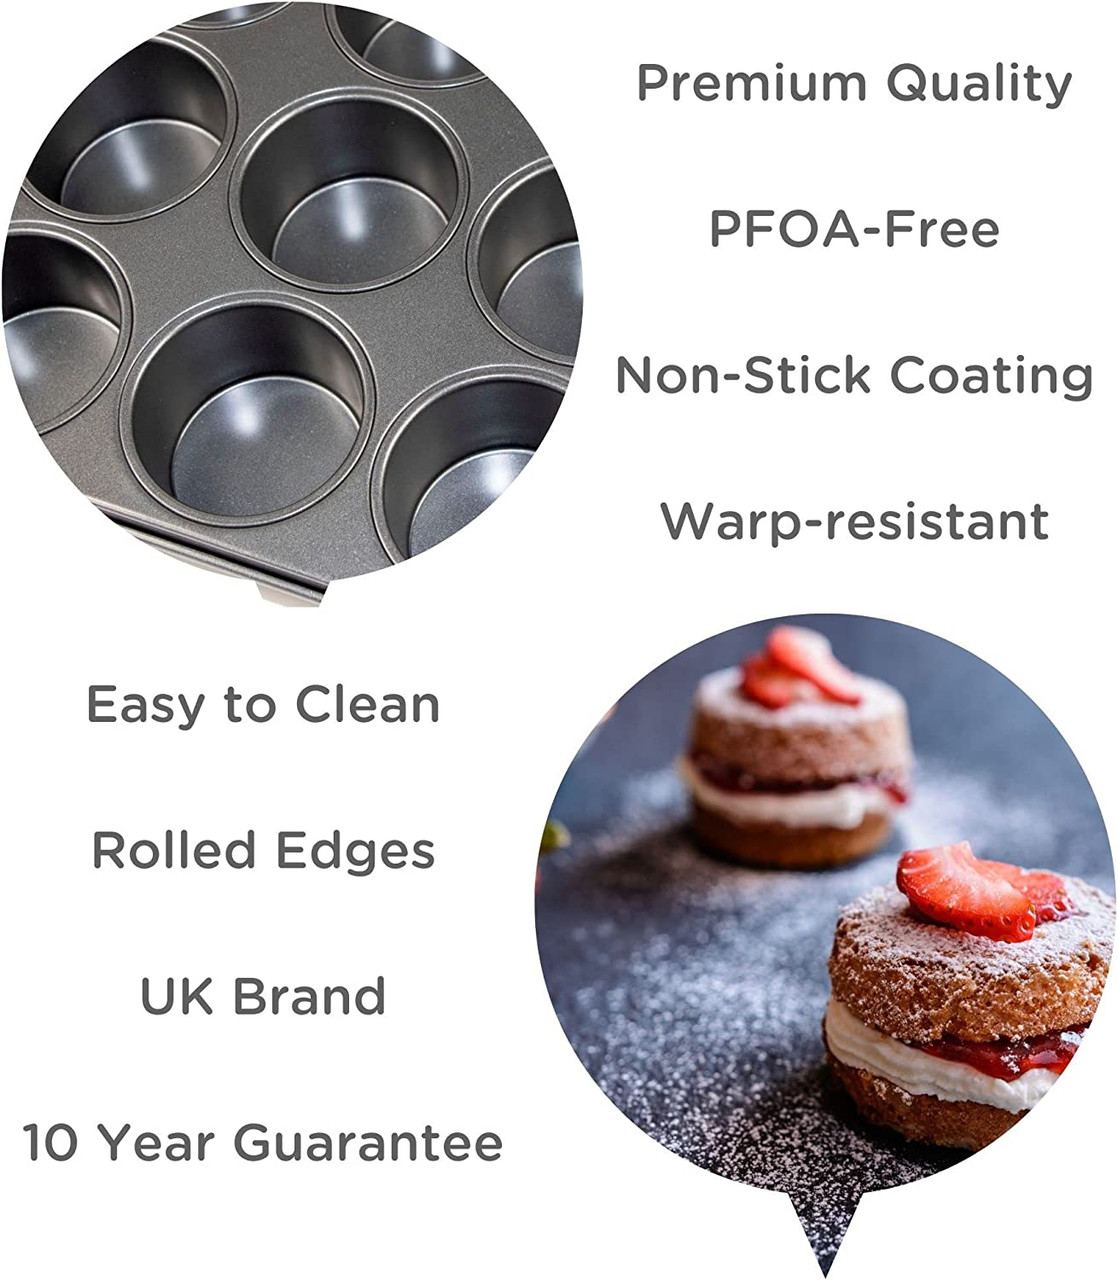 Wrenbury Pro Mini Cheesecake Pans Removable Bottom 12 Hole - Heavy Gauge Carbon Steel Muffin Cupcake Pan Loose Bottom for Baking - 3 inch Individual